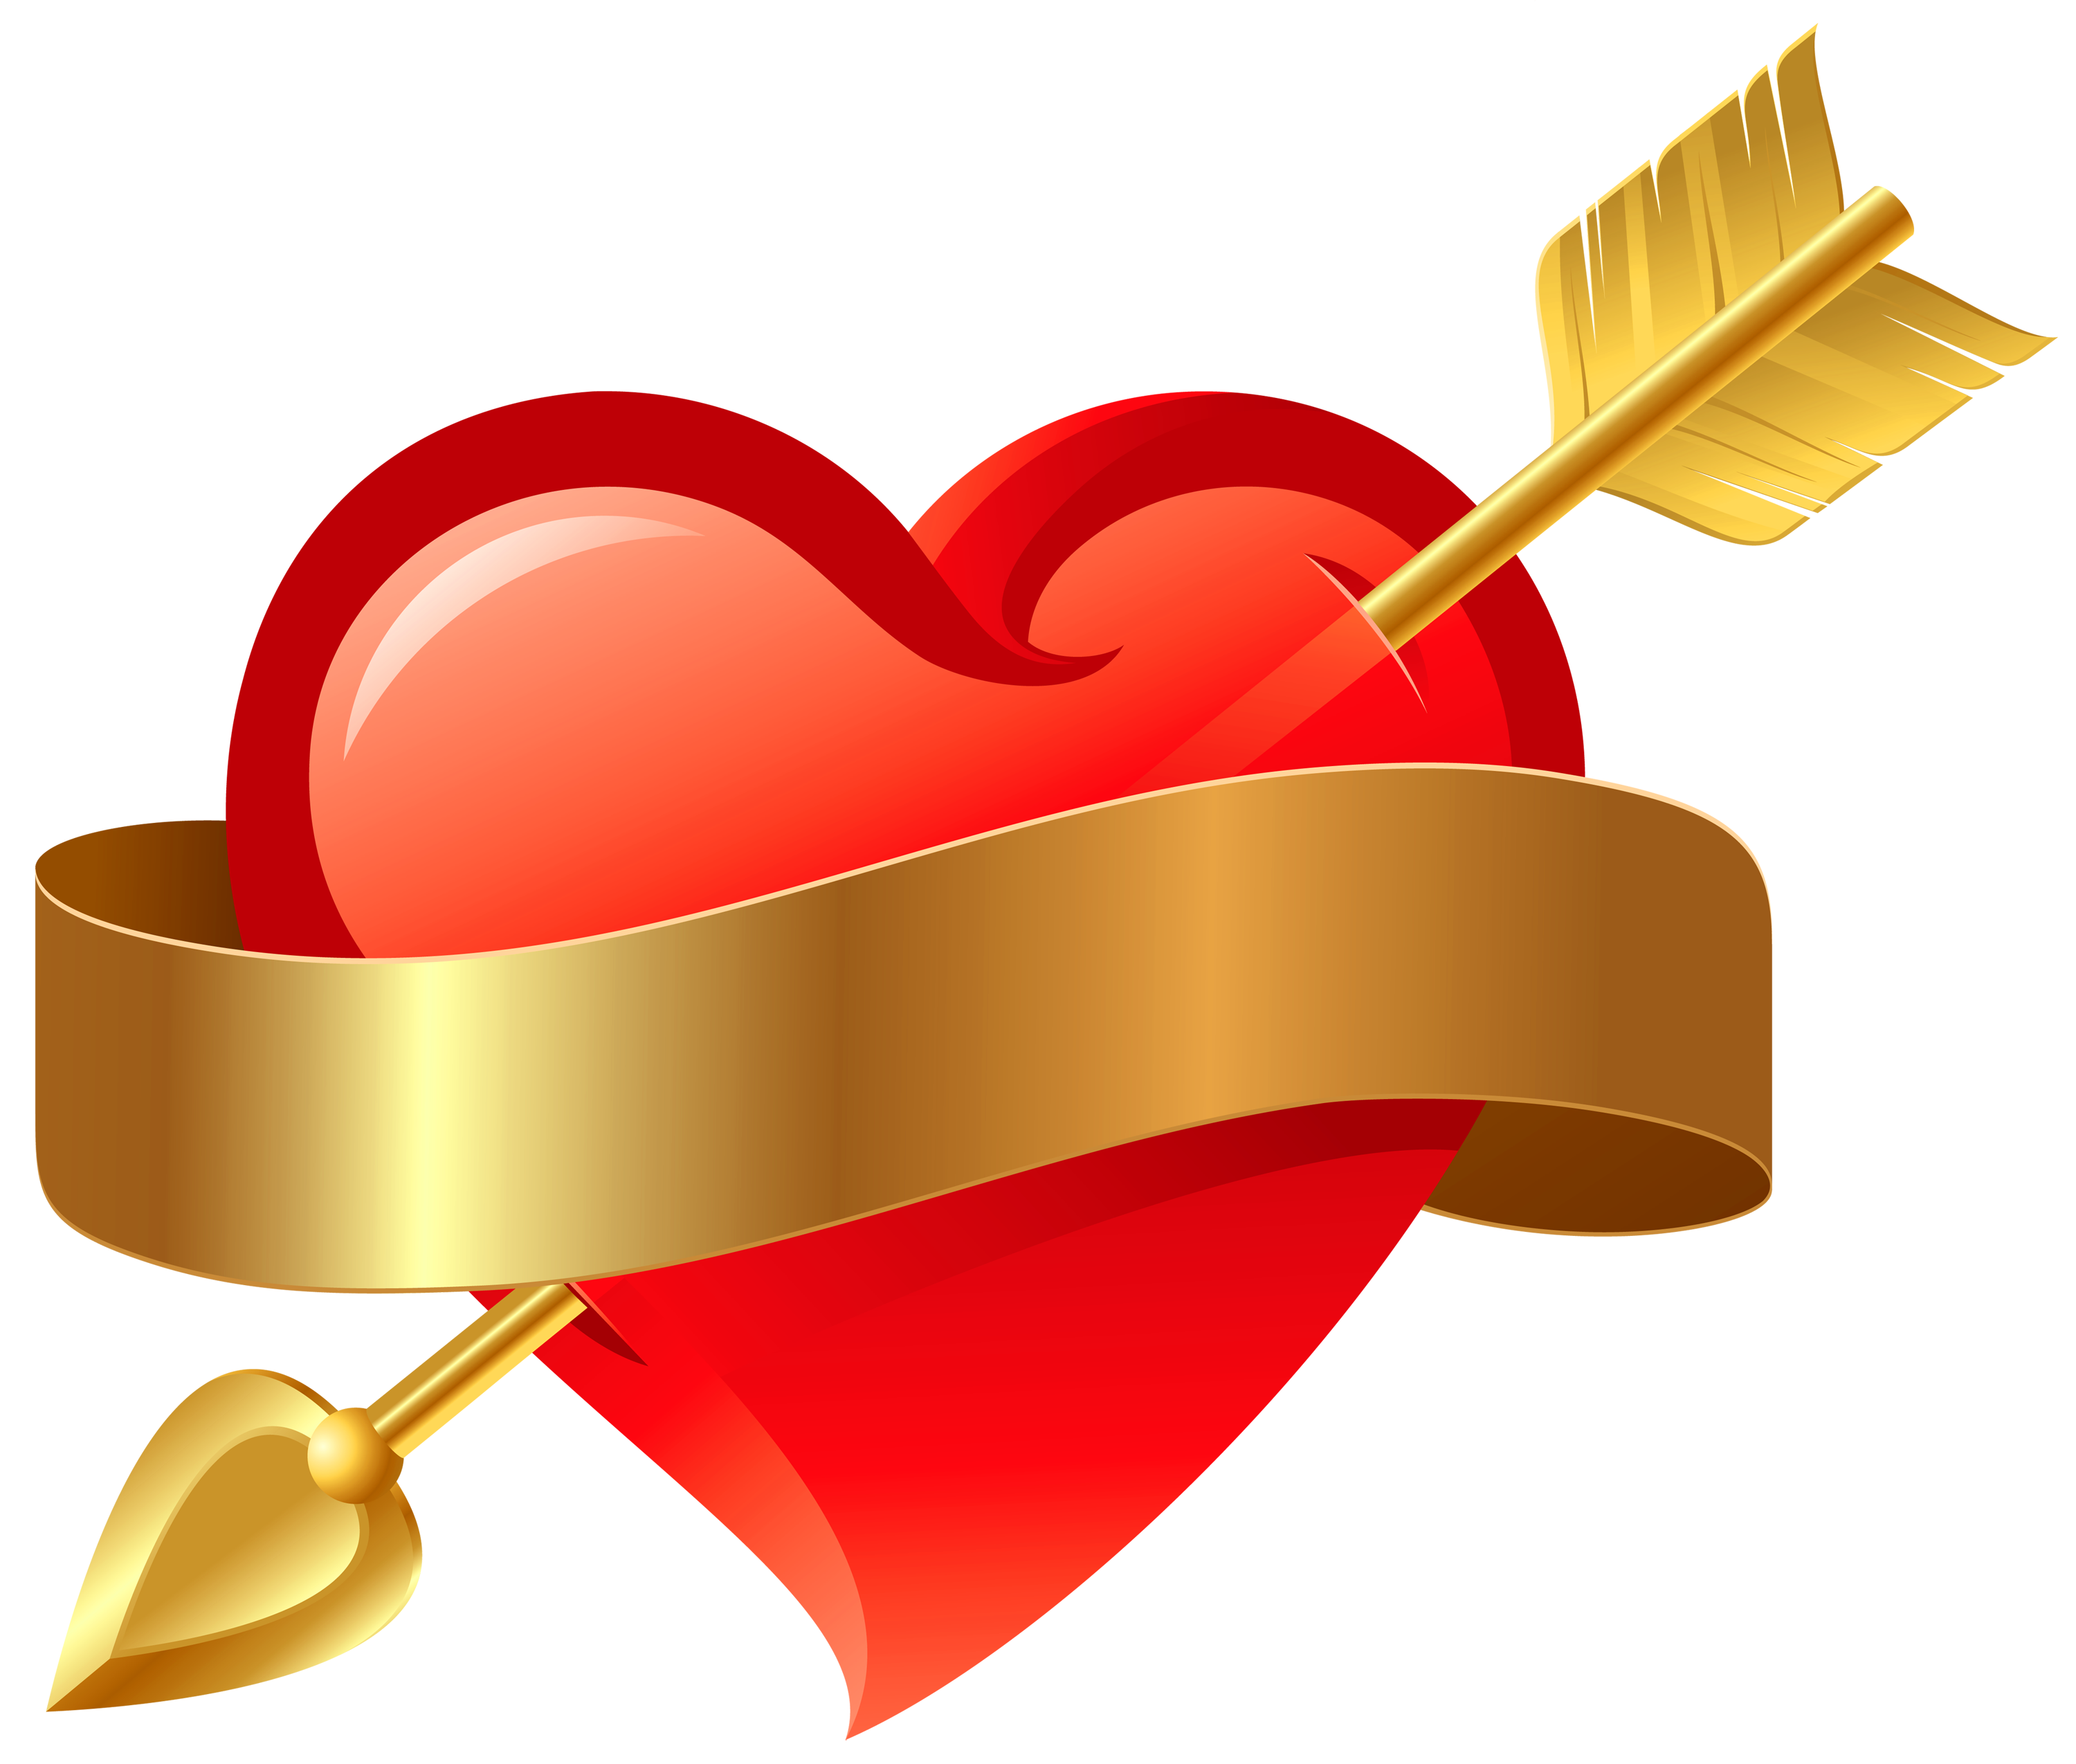 Red Heart with Arrow PNG Clipart